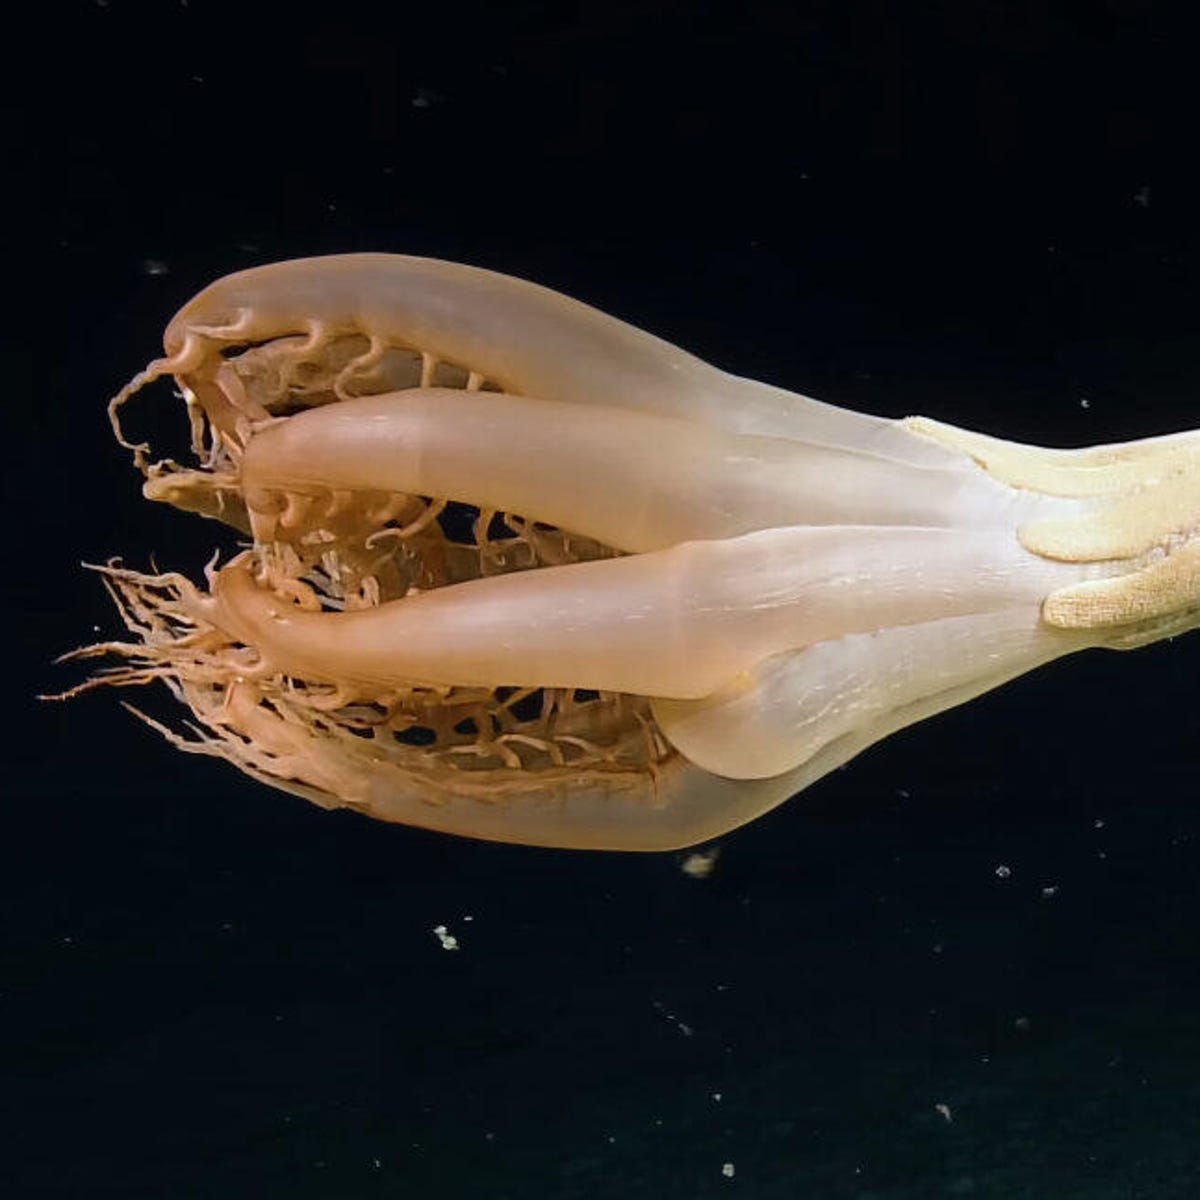 Thrilling Discovery': Surprising Sea Creature Spotted in Pacific - CNET